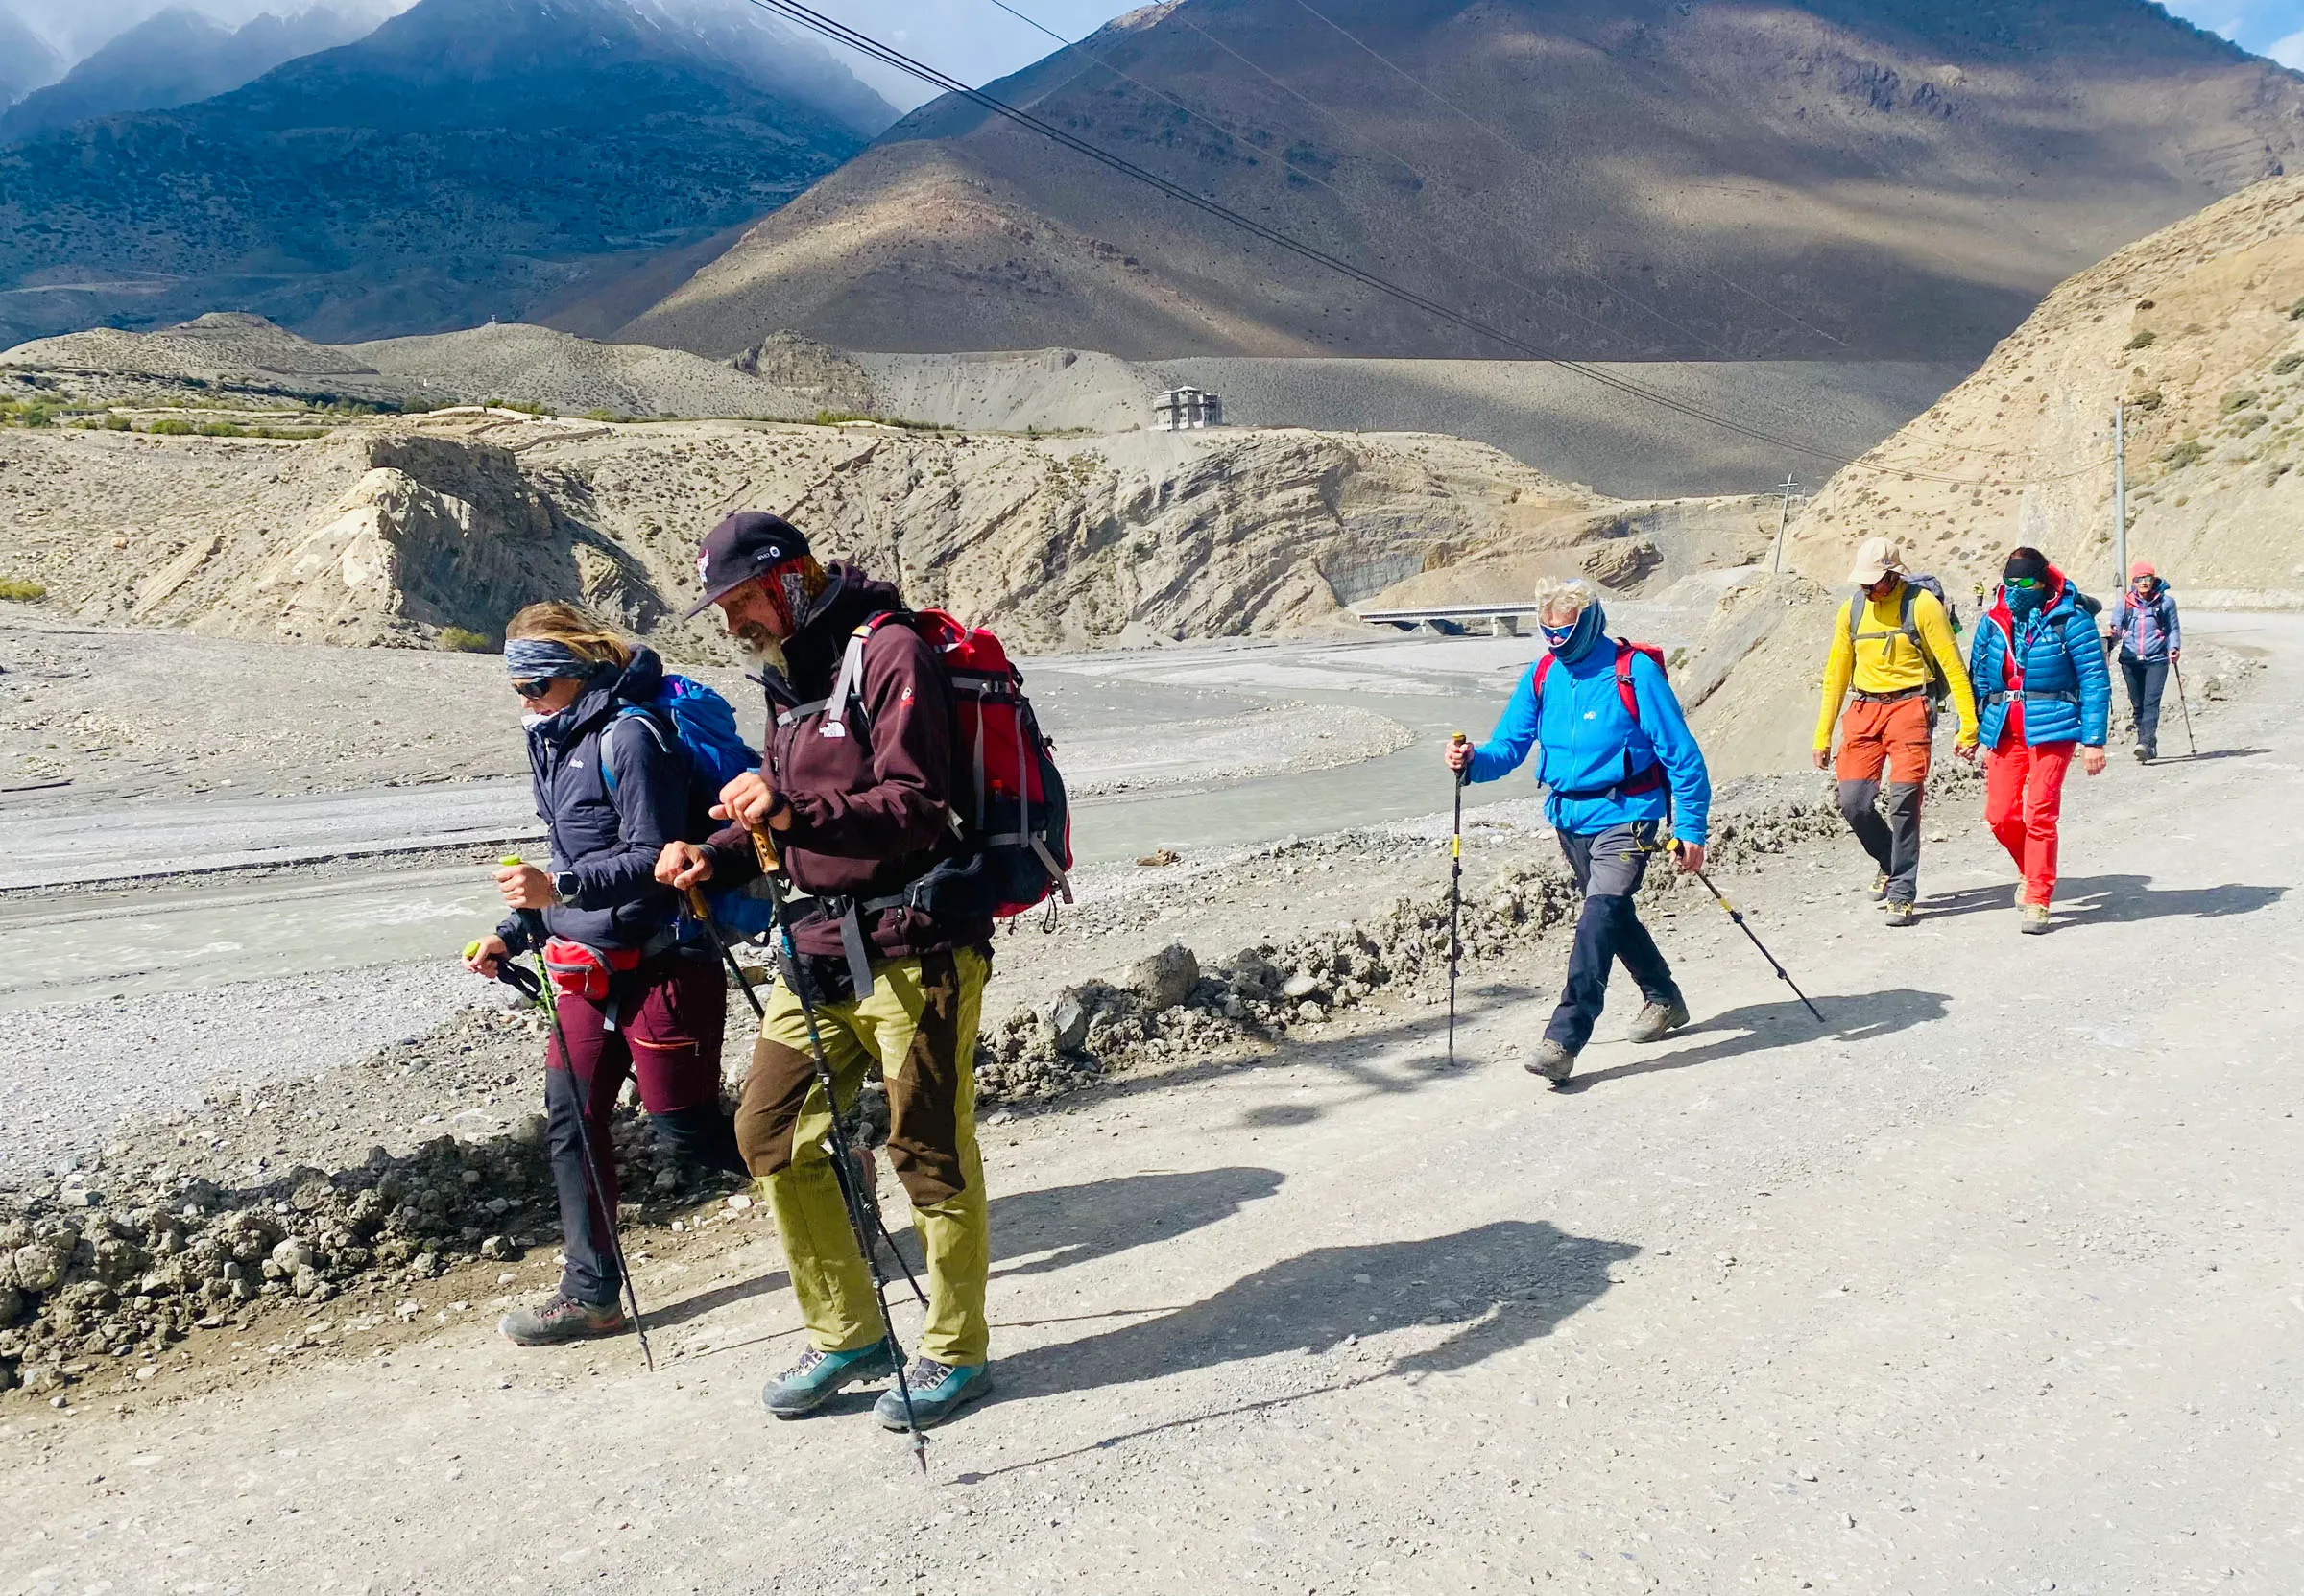 Tourism bounces back in Mustang